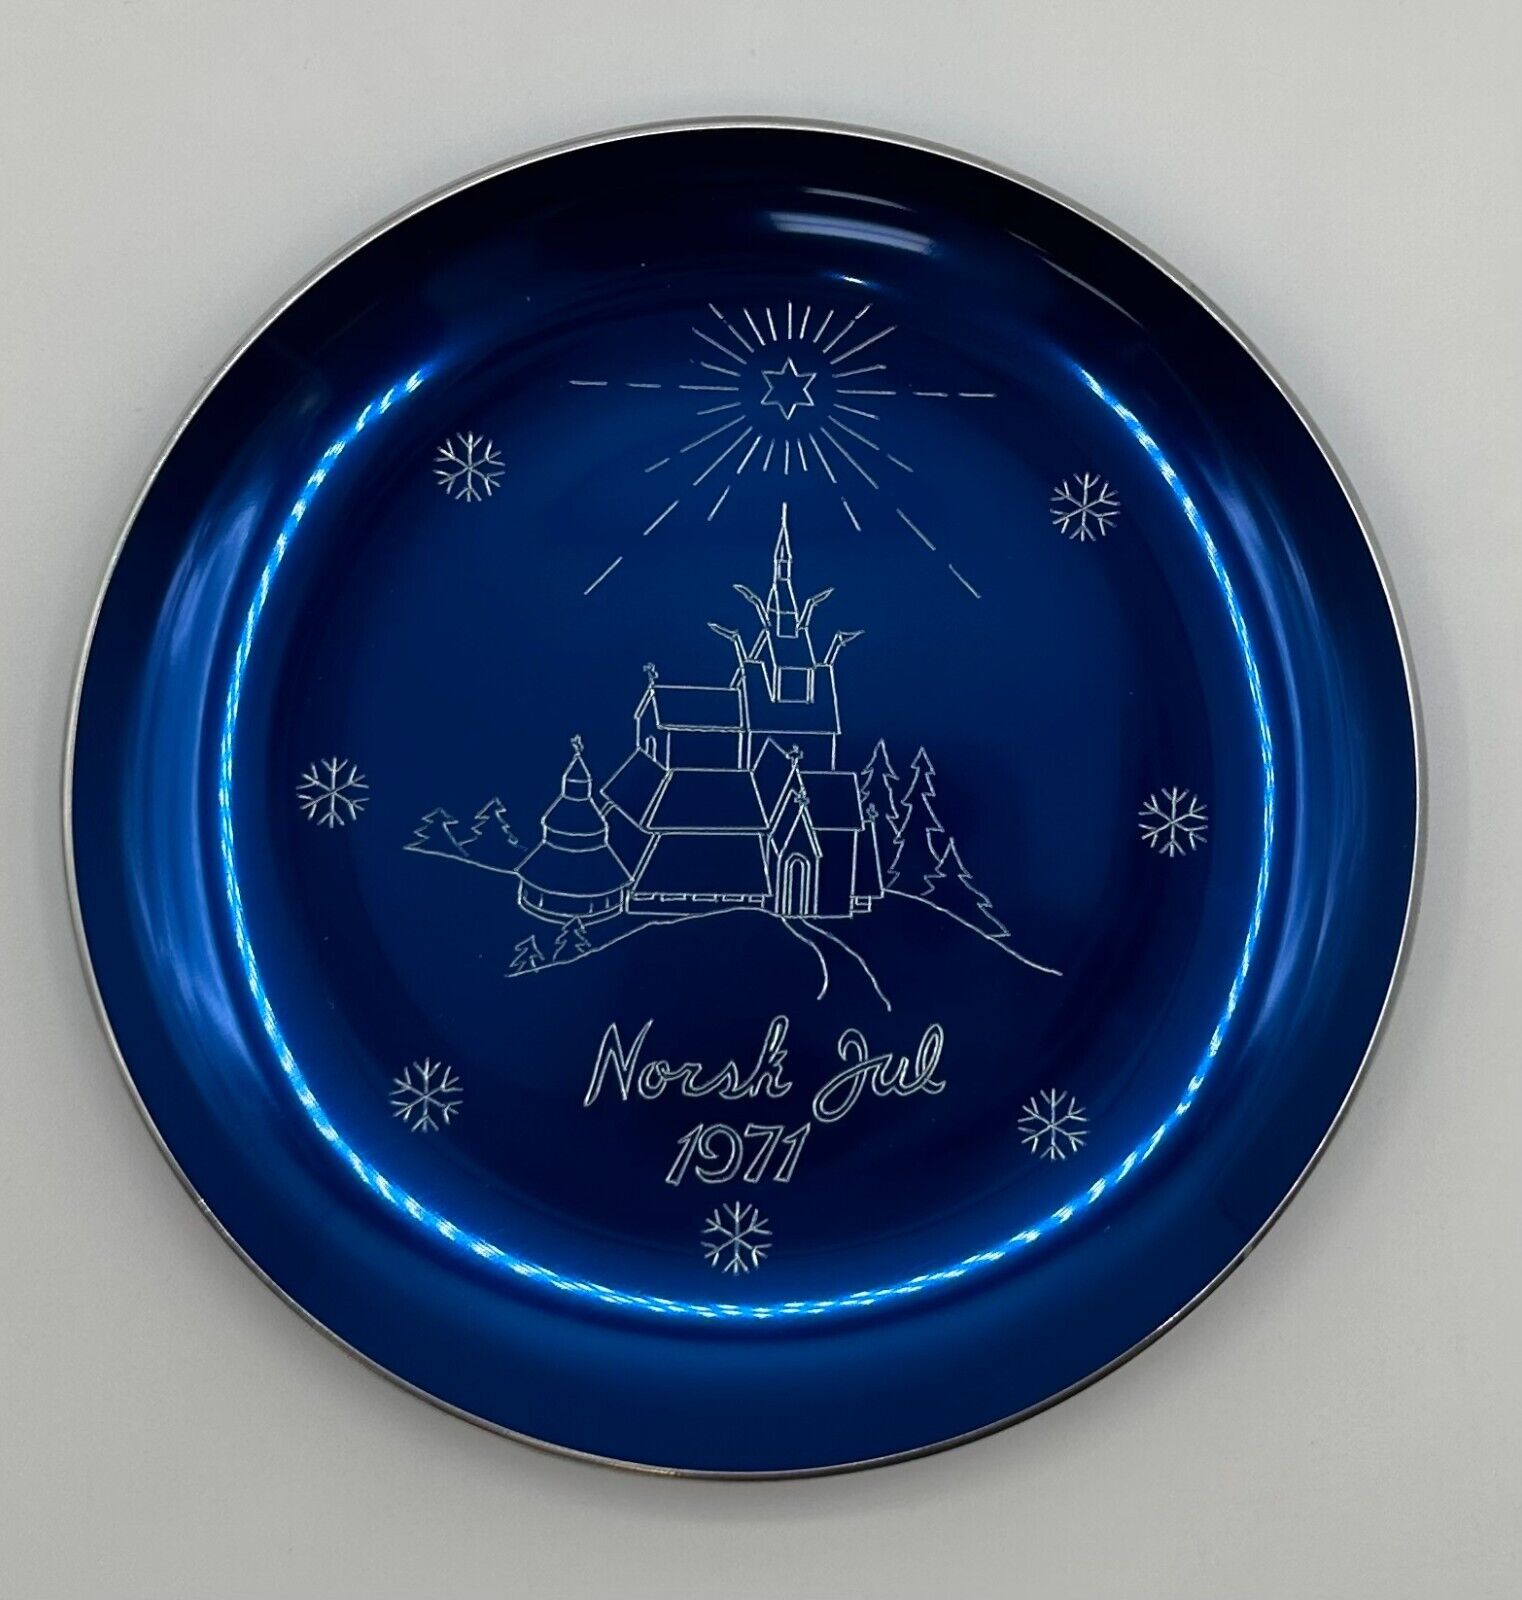 1971 Norsk Jul Christmas Plate Wooden Stave Church Historic Norway - Blue